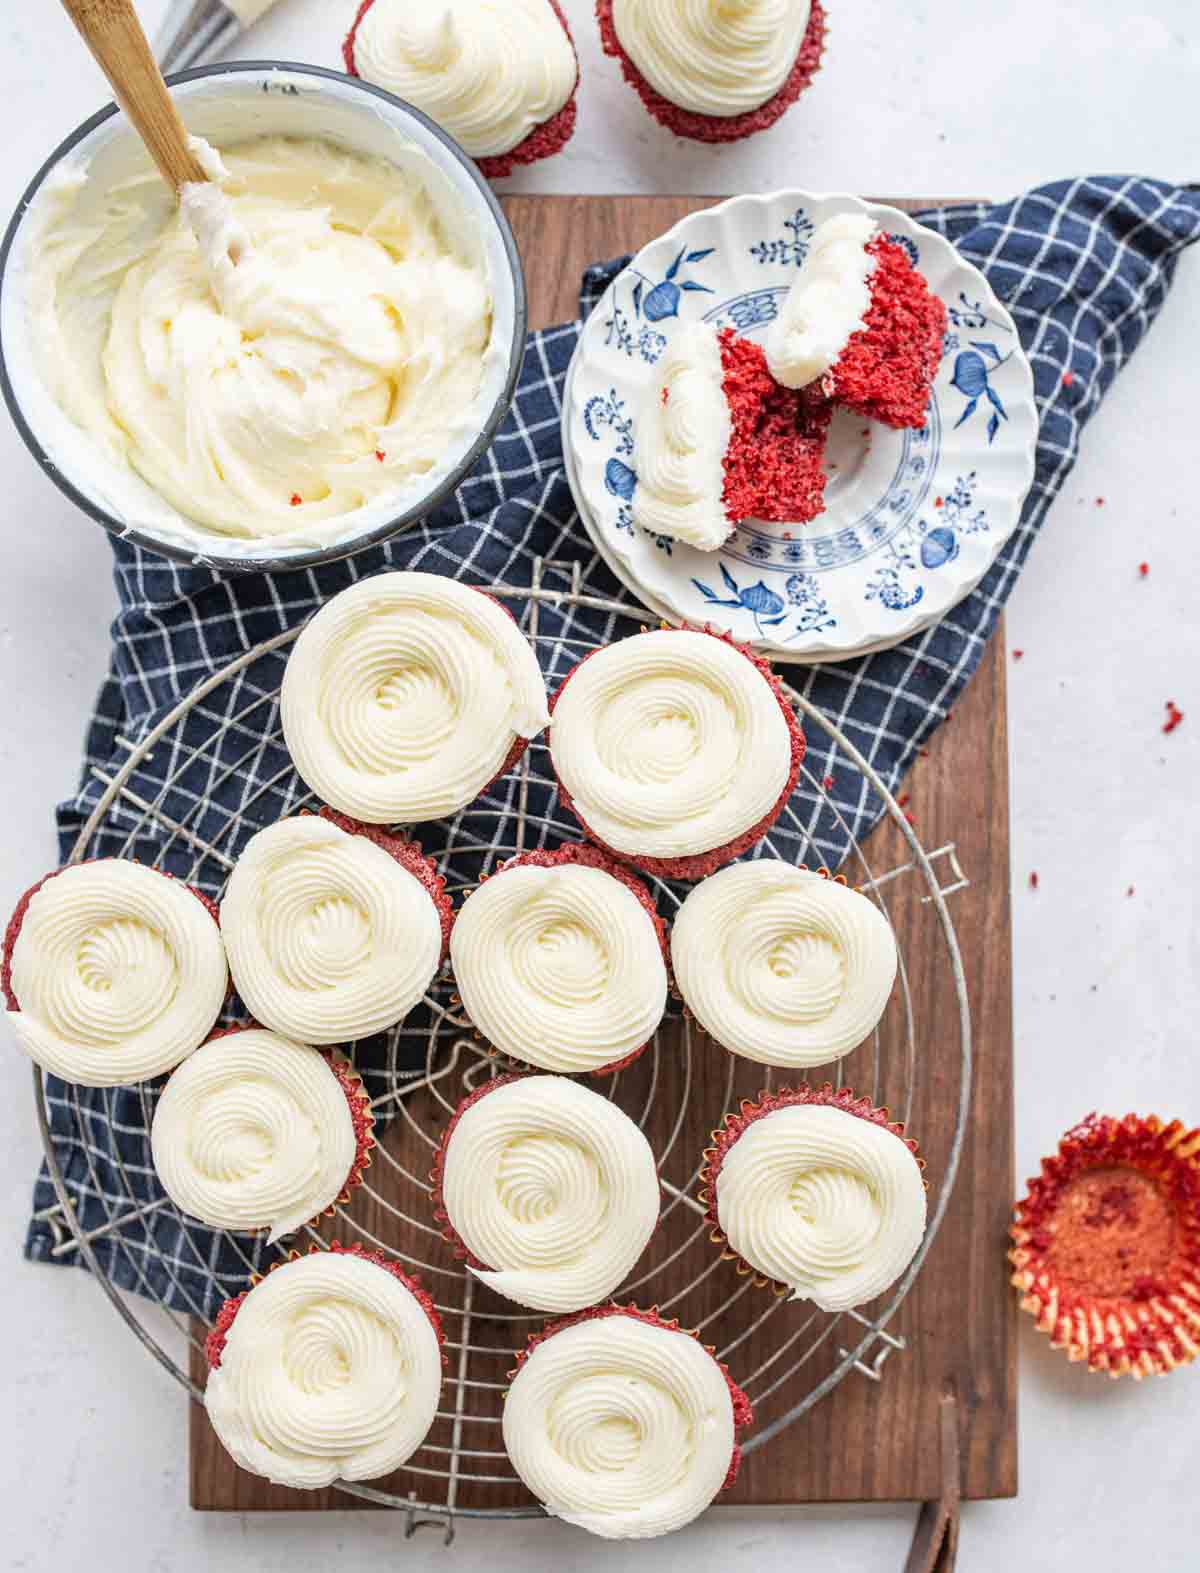 top view aesthetic scene of red velvet cupcakes with cream cheese frosting